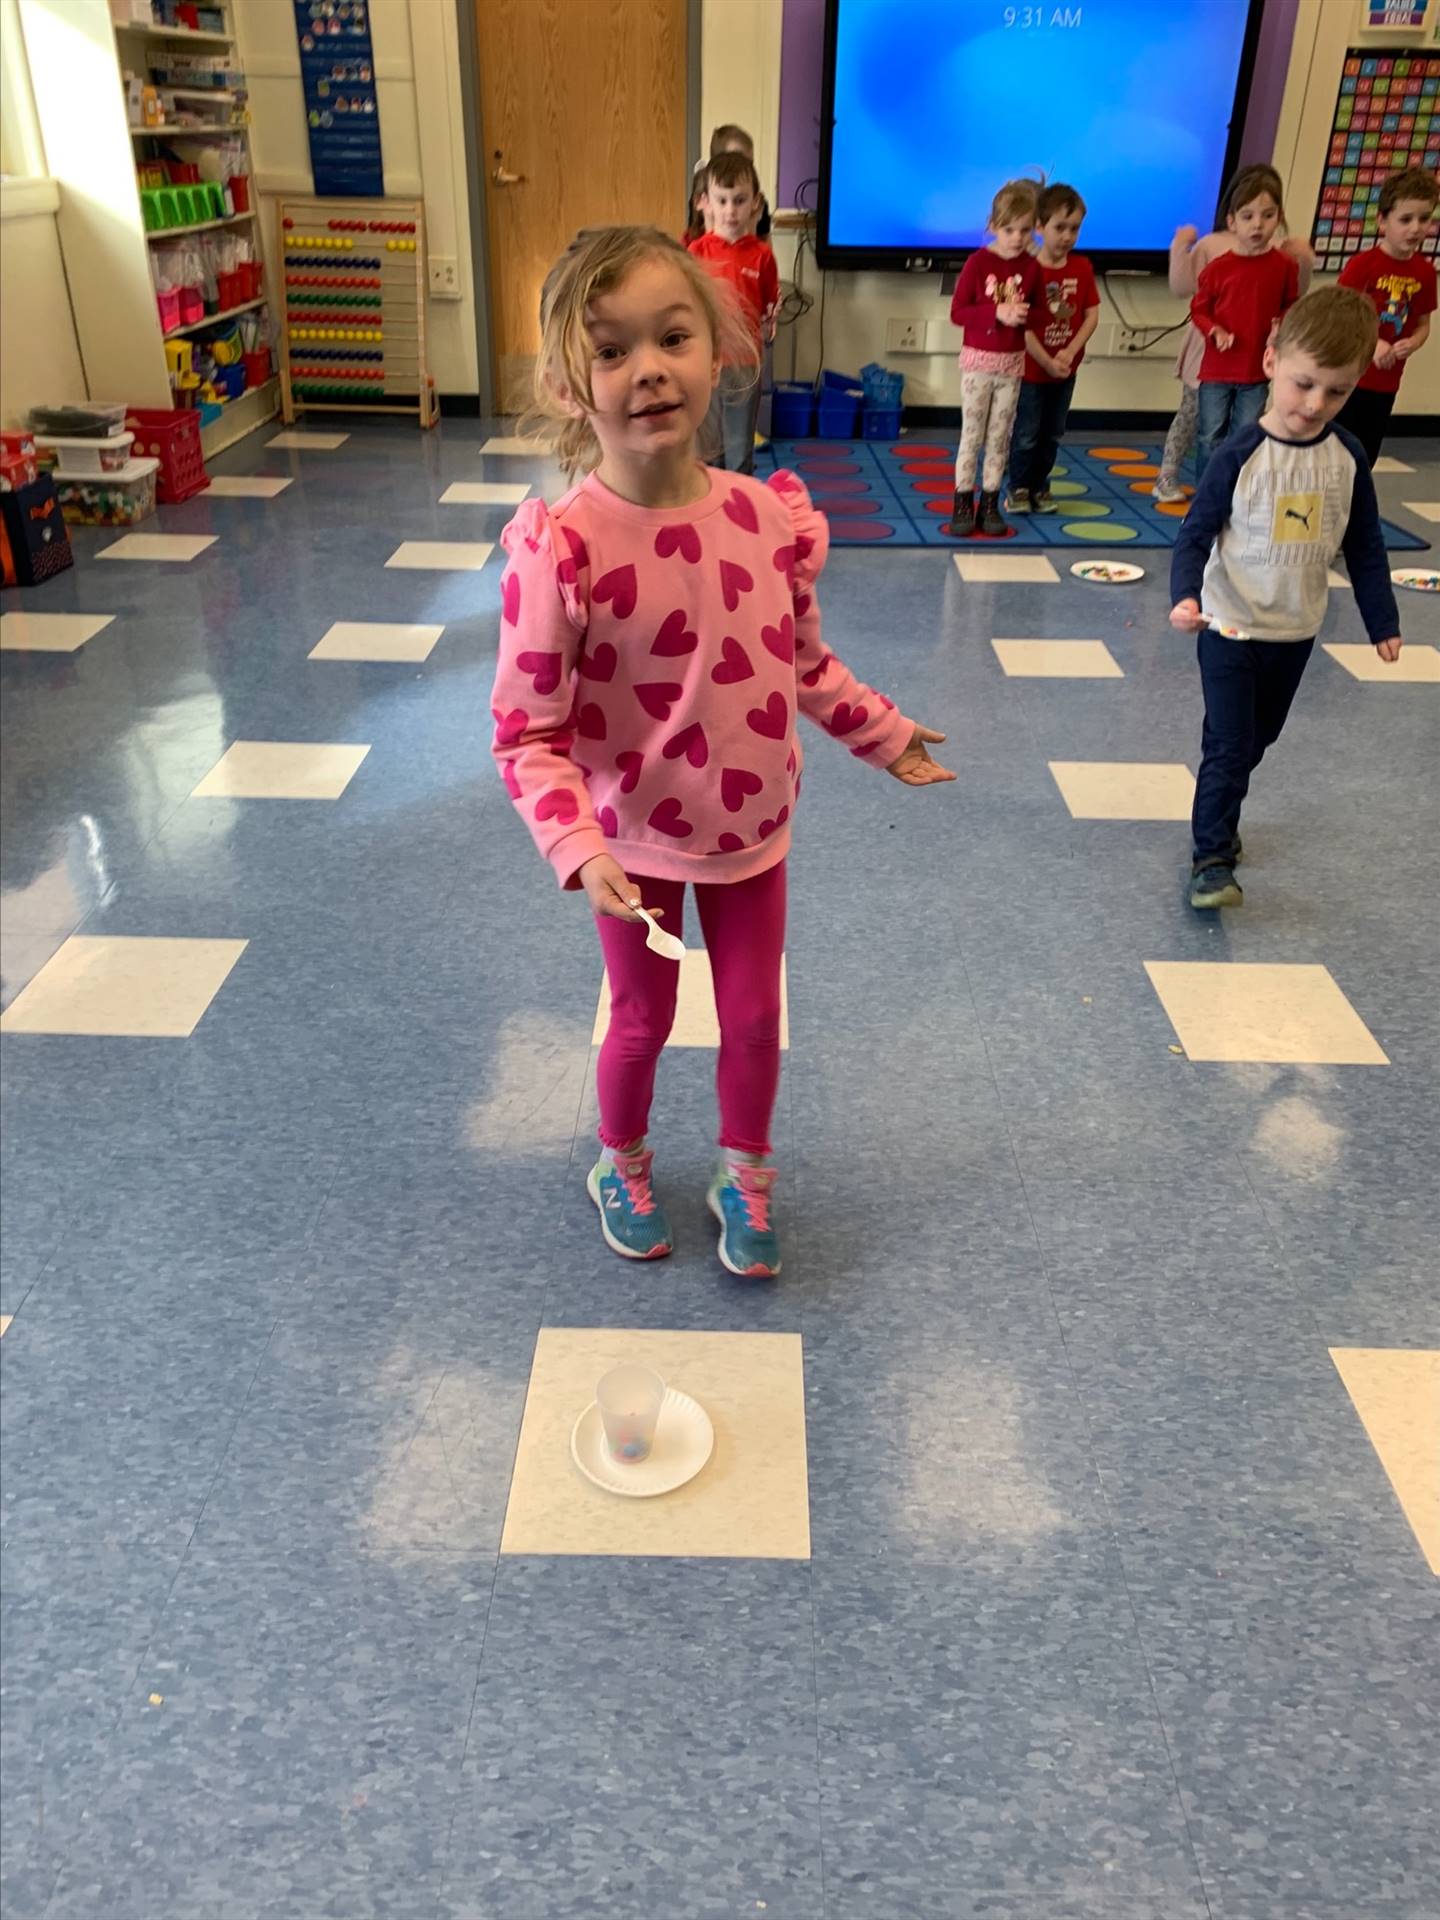 student playing a game with plate on floor.